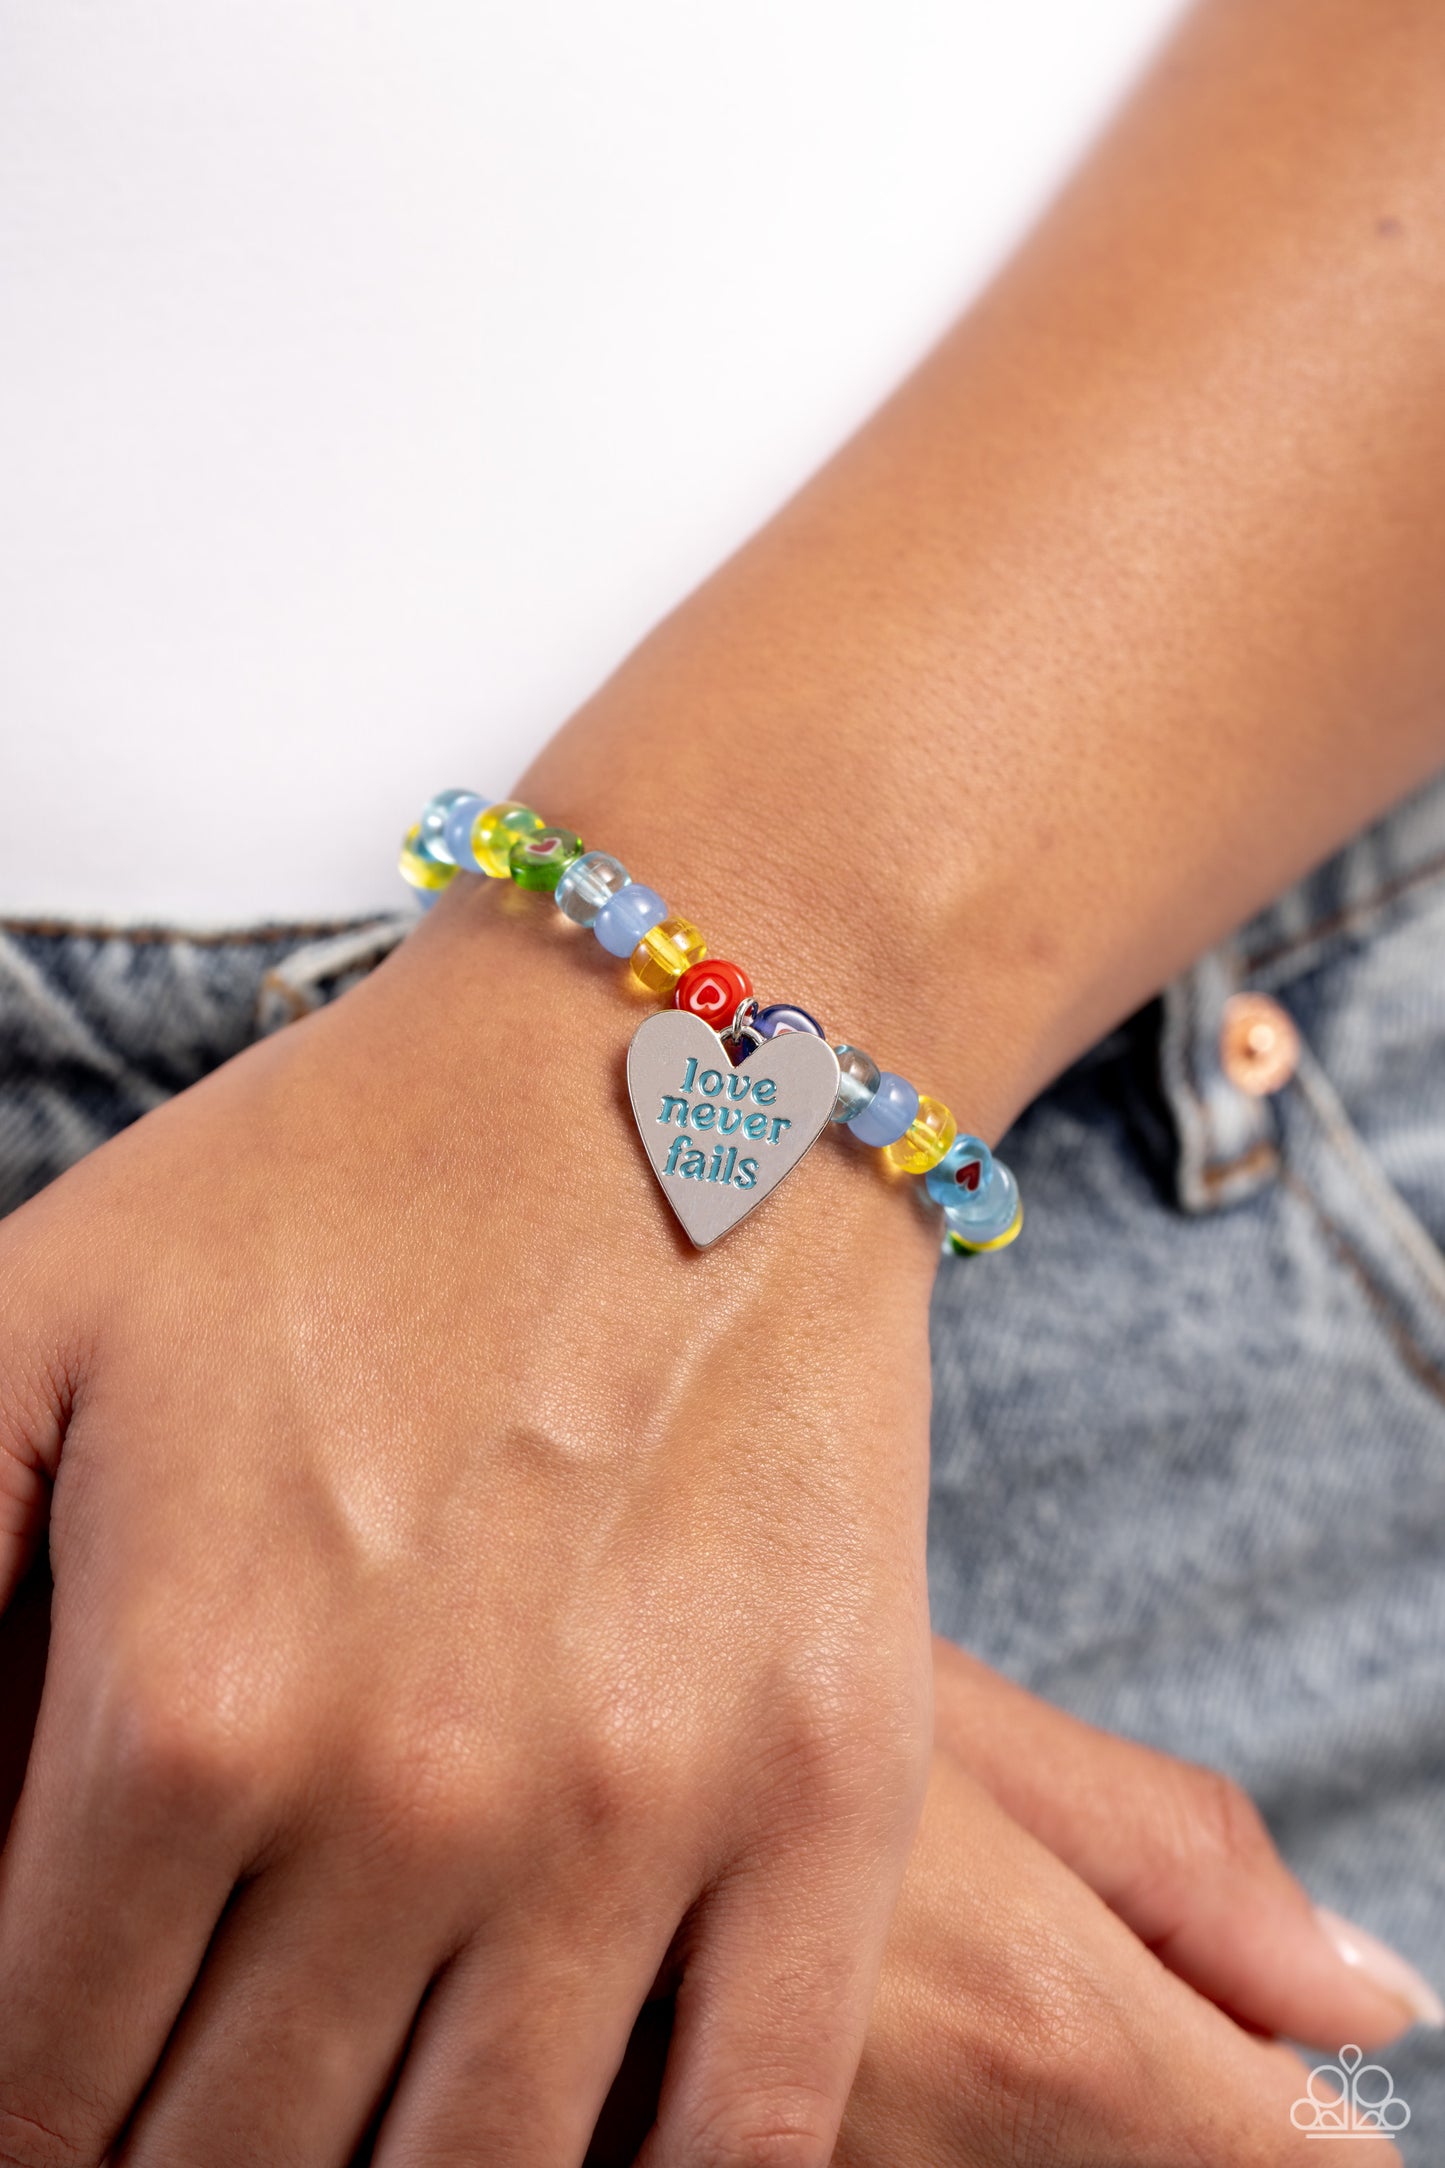 Unstoppable Love Multi Inspirational Bracelet - Paparazzi Accessories  Infused along an invisible string, multicolored glassy beads and beads with heart centers wrap around the wrist for a heartfelt statement. A silver heart with the stamped phrase "love never fails" in a blue font dangles below the multicolored design for an inspirational finish.  Sold as one individual bracelet.  P9WD-MTXX-065XX